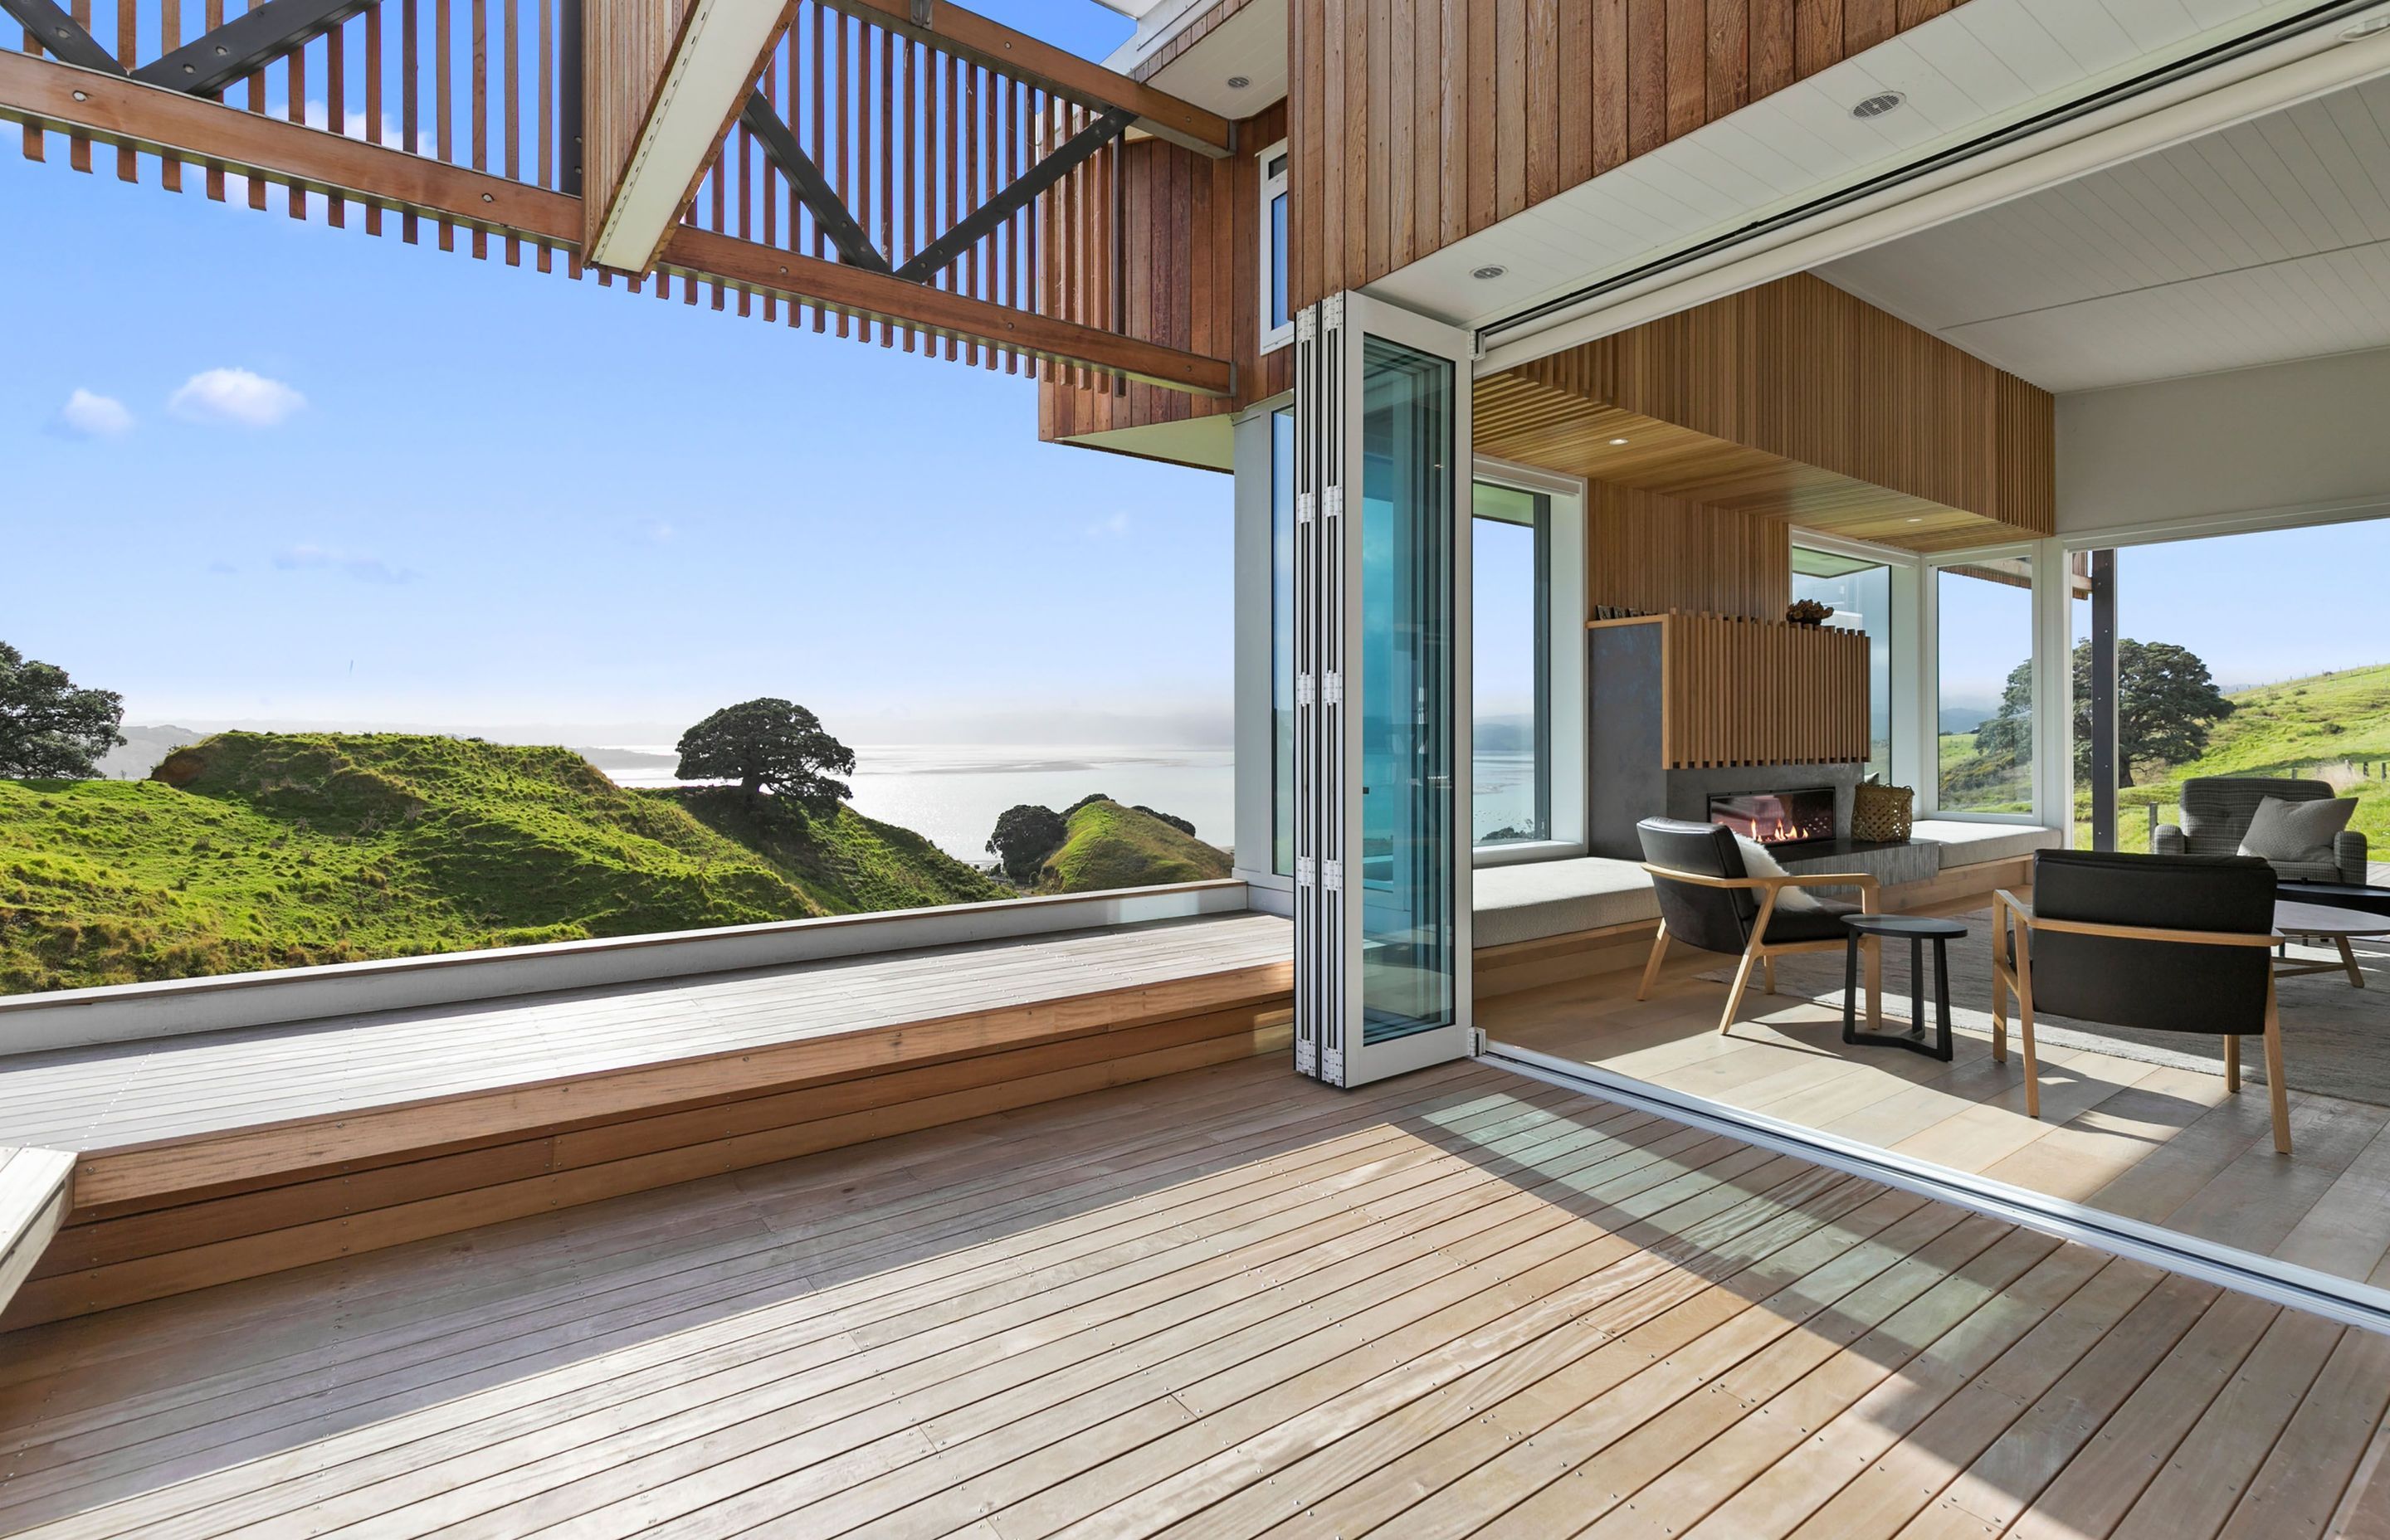 A true "inside / outside" flow for entertaining and enjoying the sea breeze.